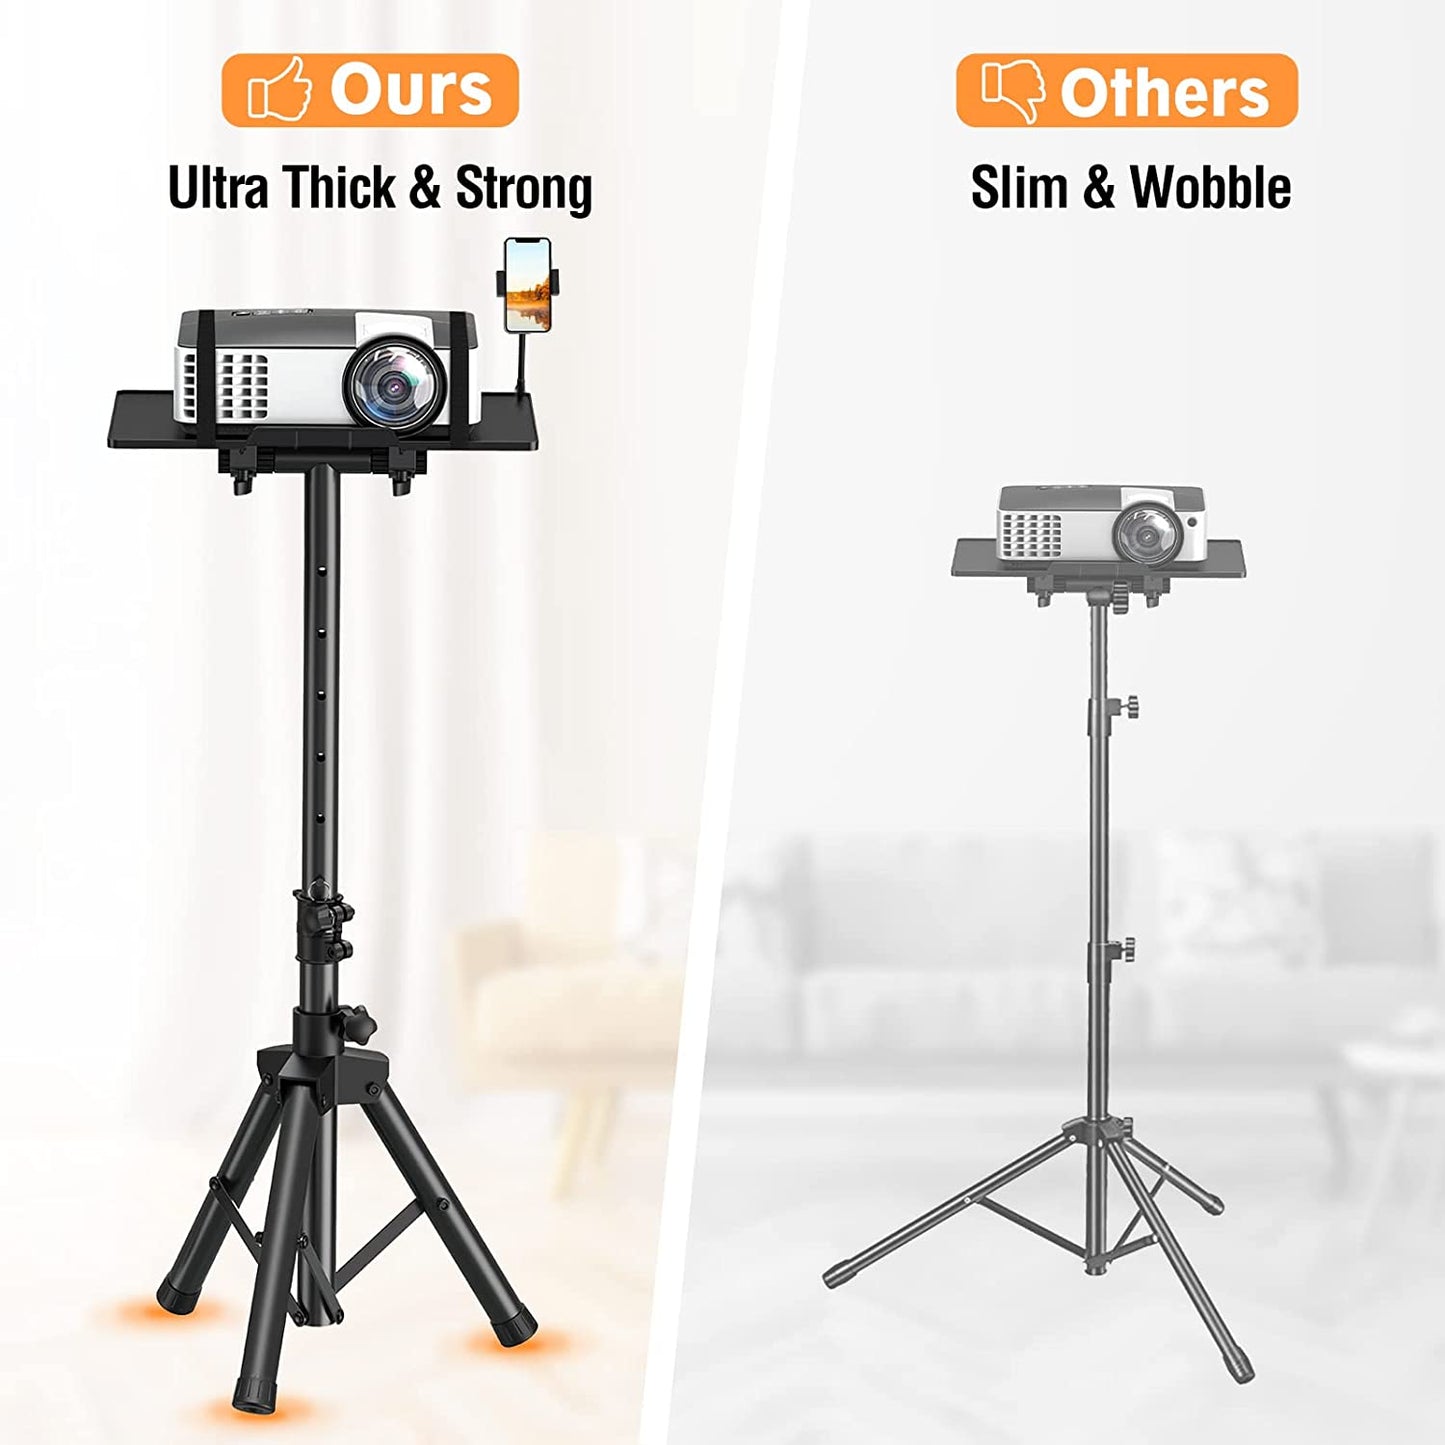 ZIMILAR Tripod Projector Stand with Phone Holder